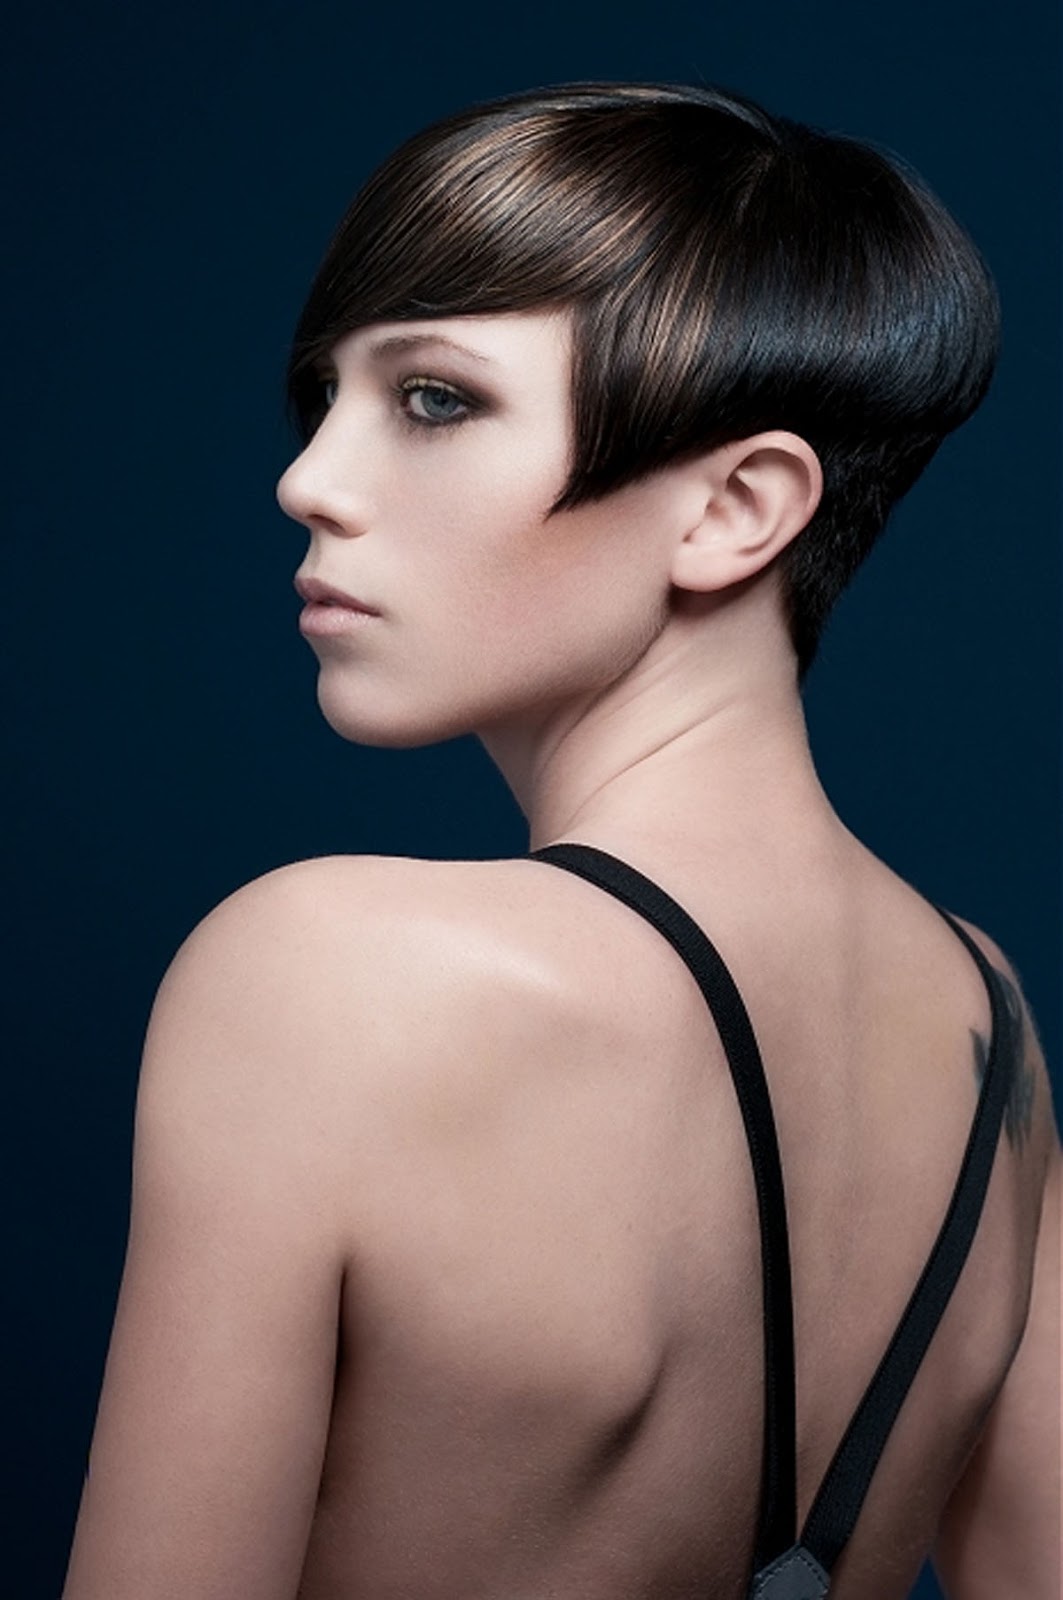 Long Haircuts With Bangs 2012 Women-Hairstyle-of-Short-Hairstyle-with-Long-Bangs.